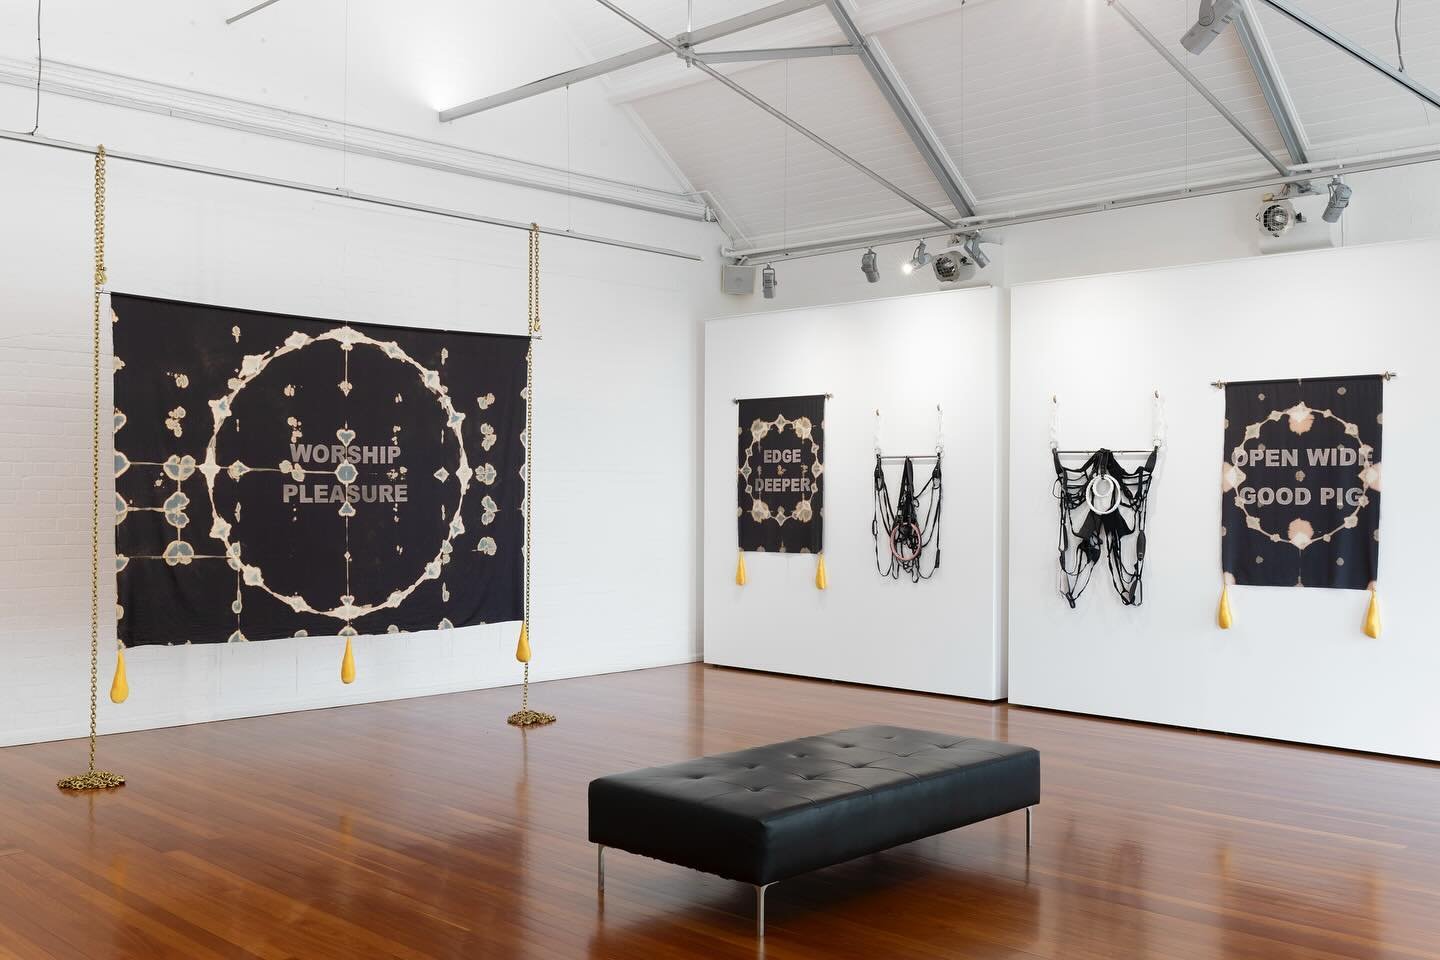 One week before the portal closes.

🕳️ 

Summoning Circle @arterealgallery until 27 April

Photograph: Jessica Maurer. Courtesy of Artereal Gallery